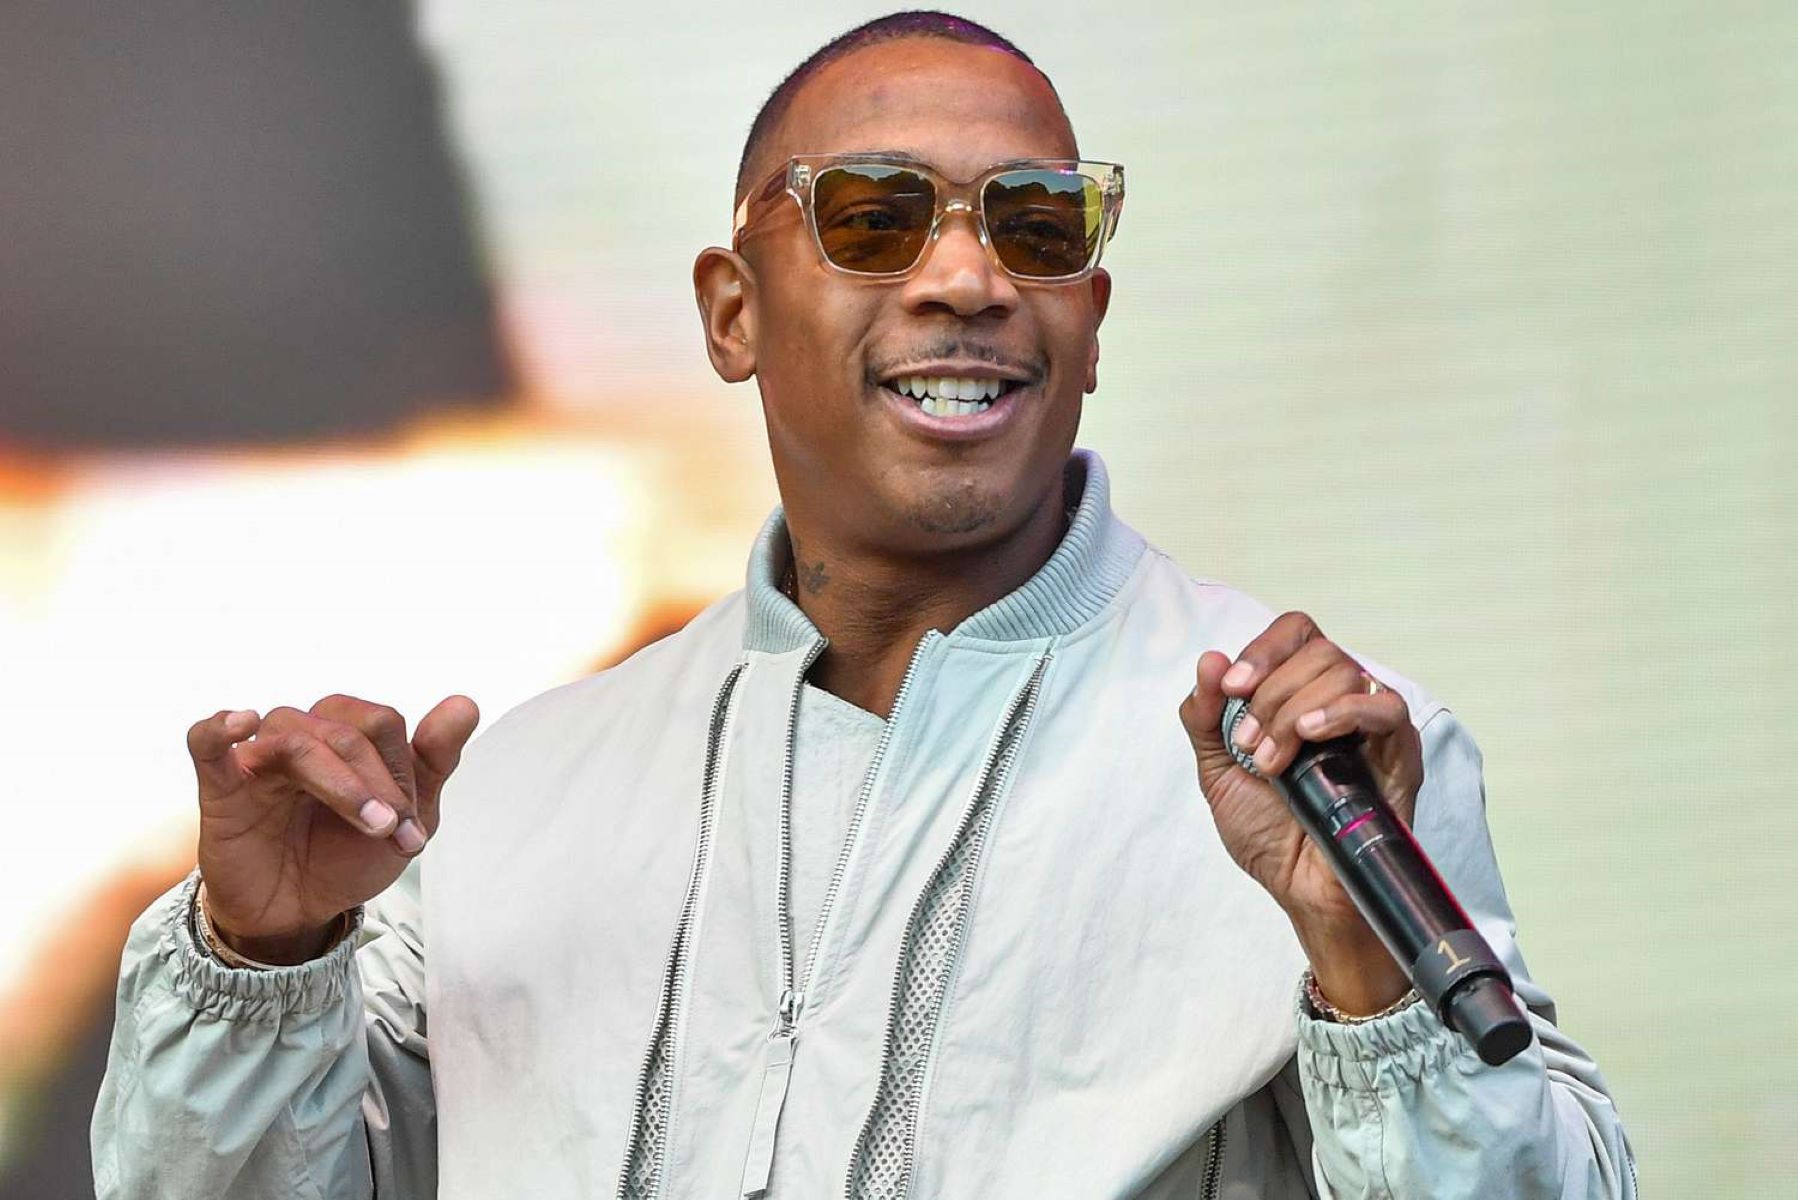 Ja Rule Throws Shade At 50 Cent Over Mic-Throwing Incident: Mocks Lawsuits And Criminal Charges